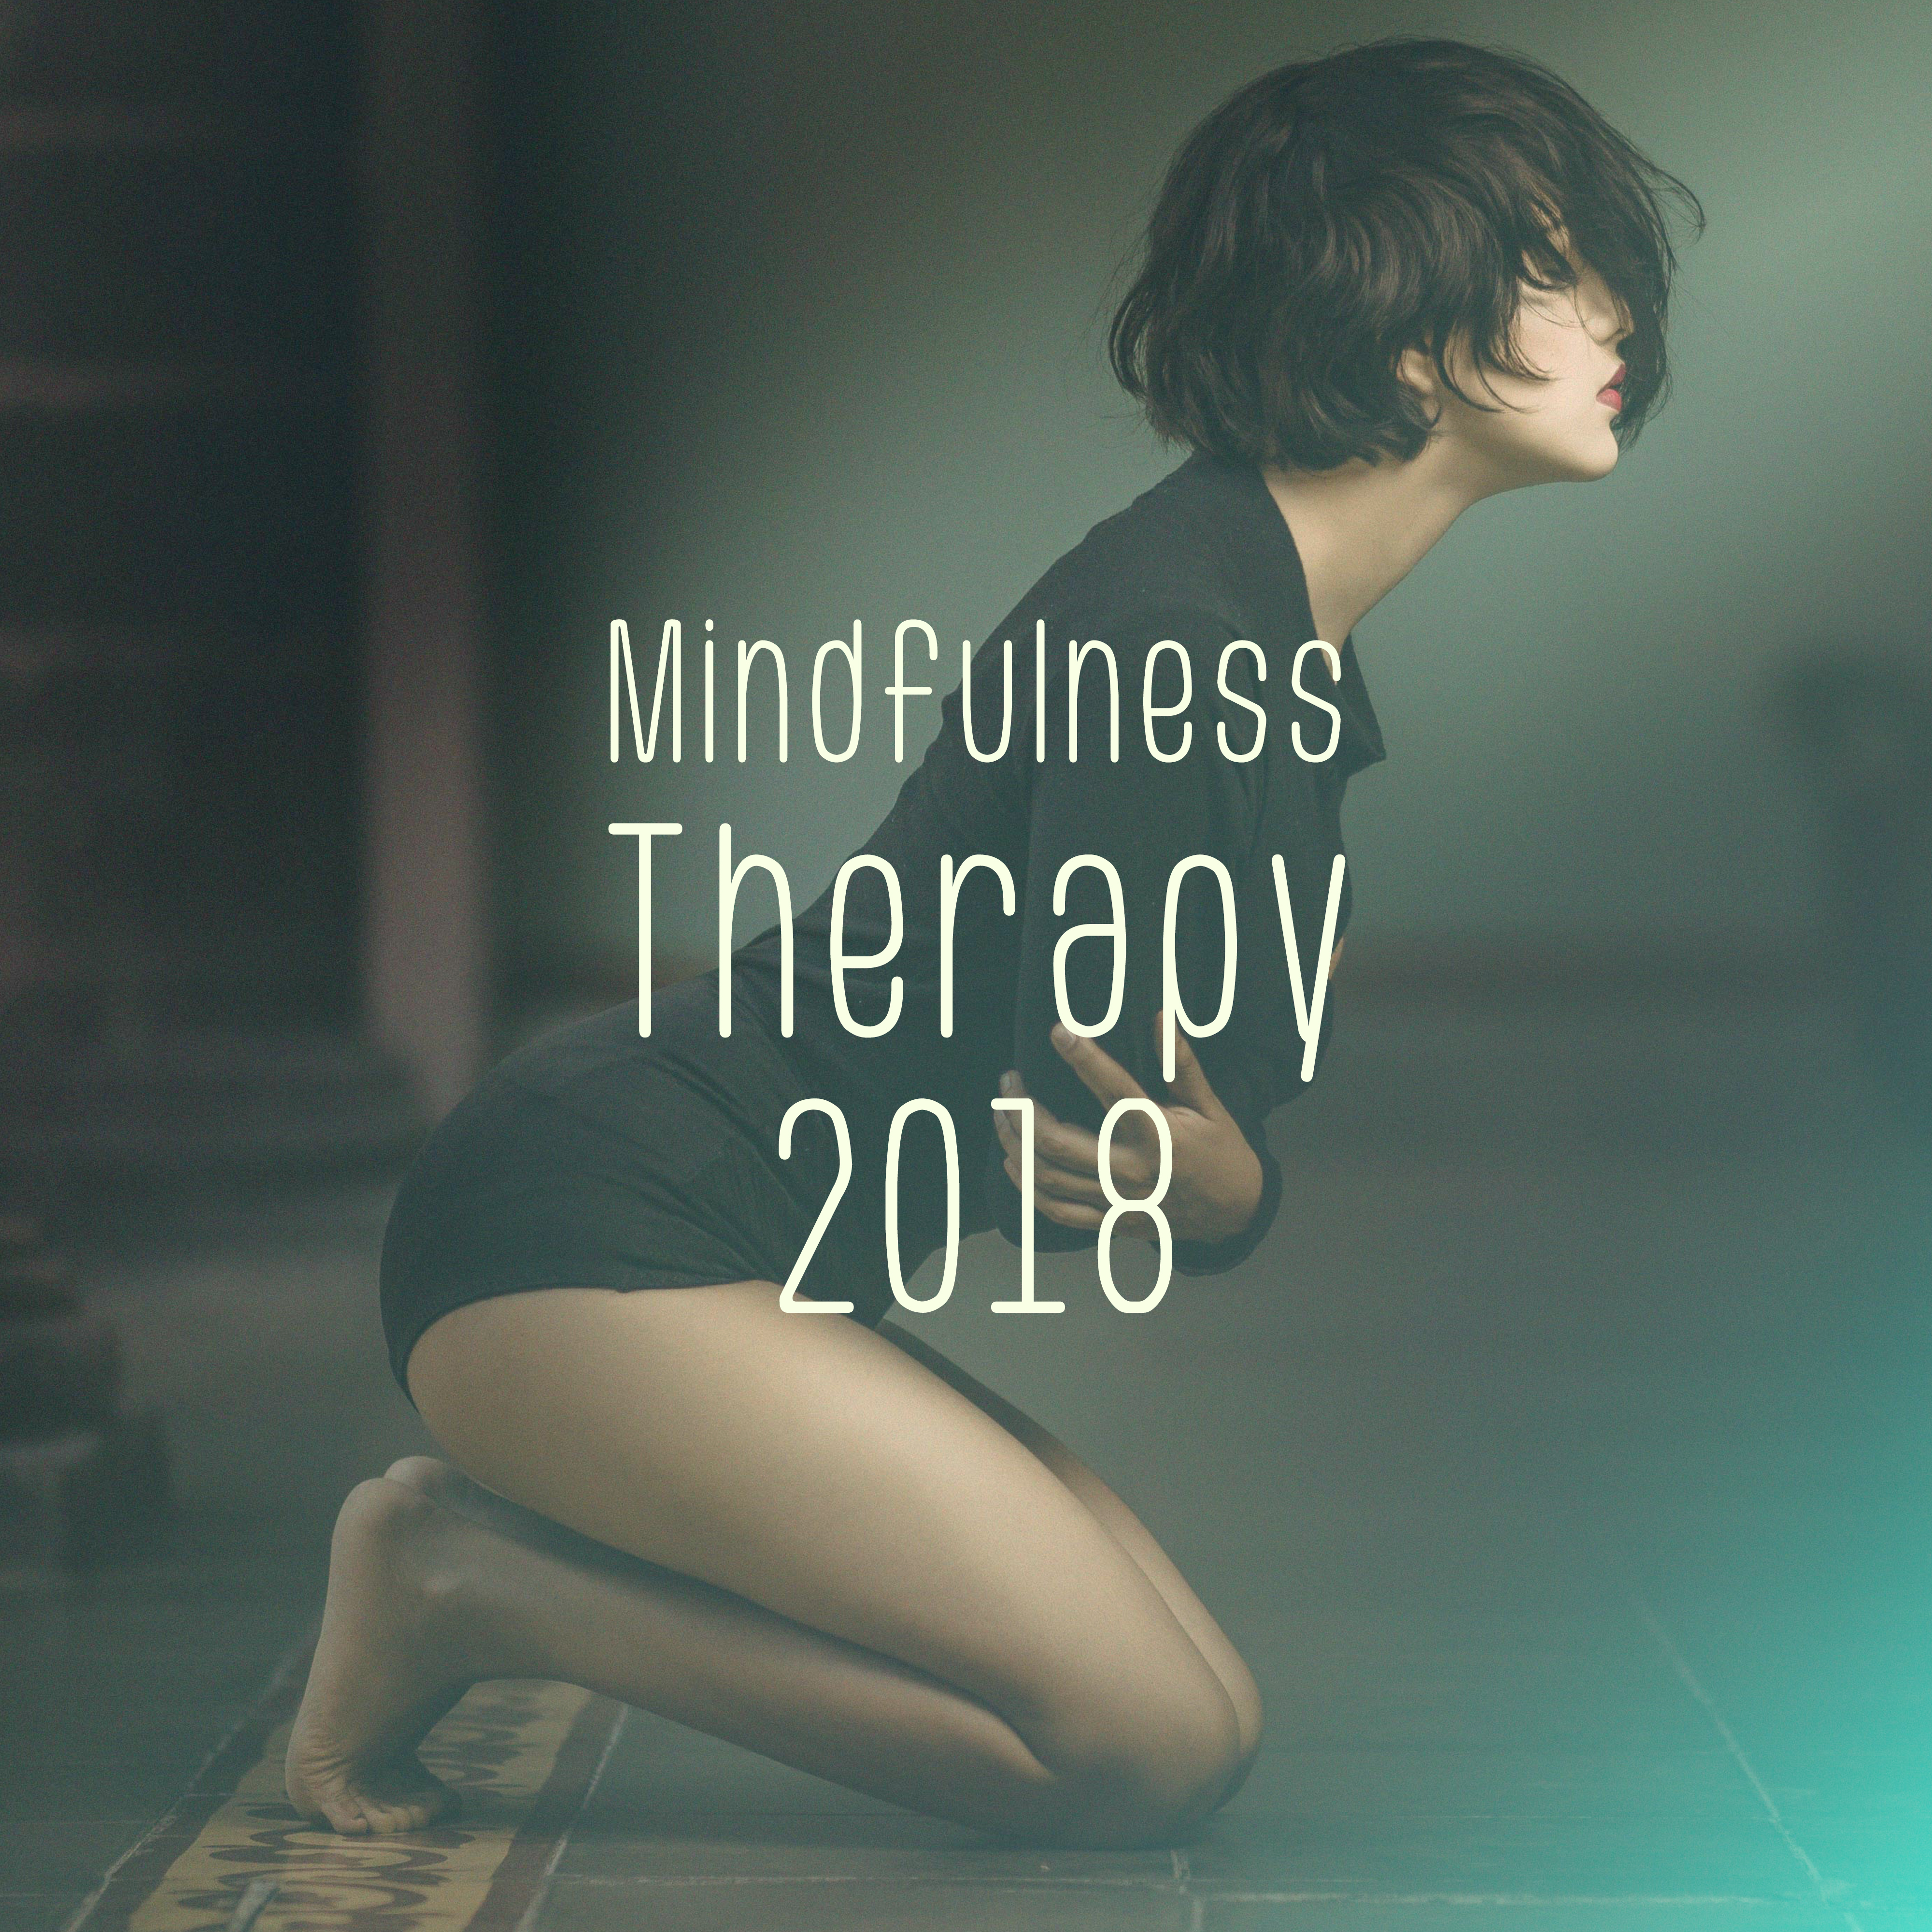 Mindfulness Therapy 2018